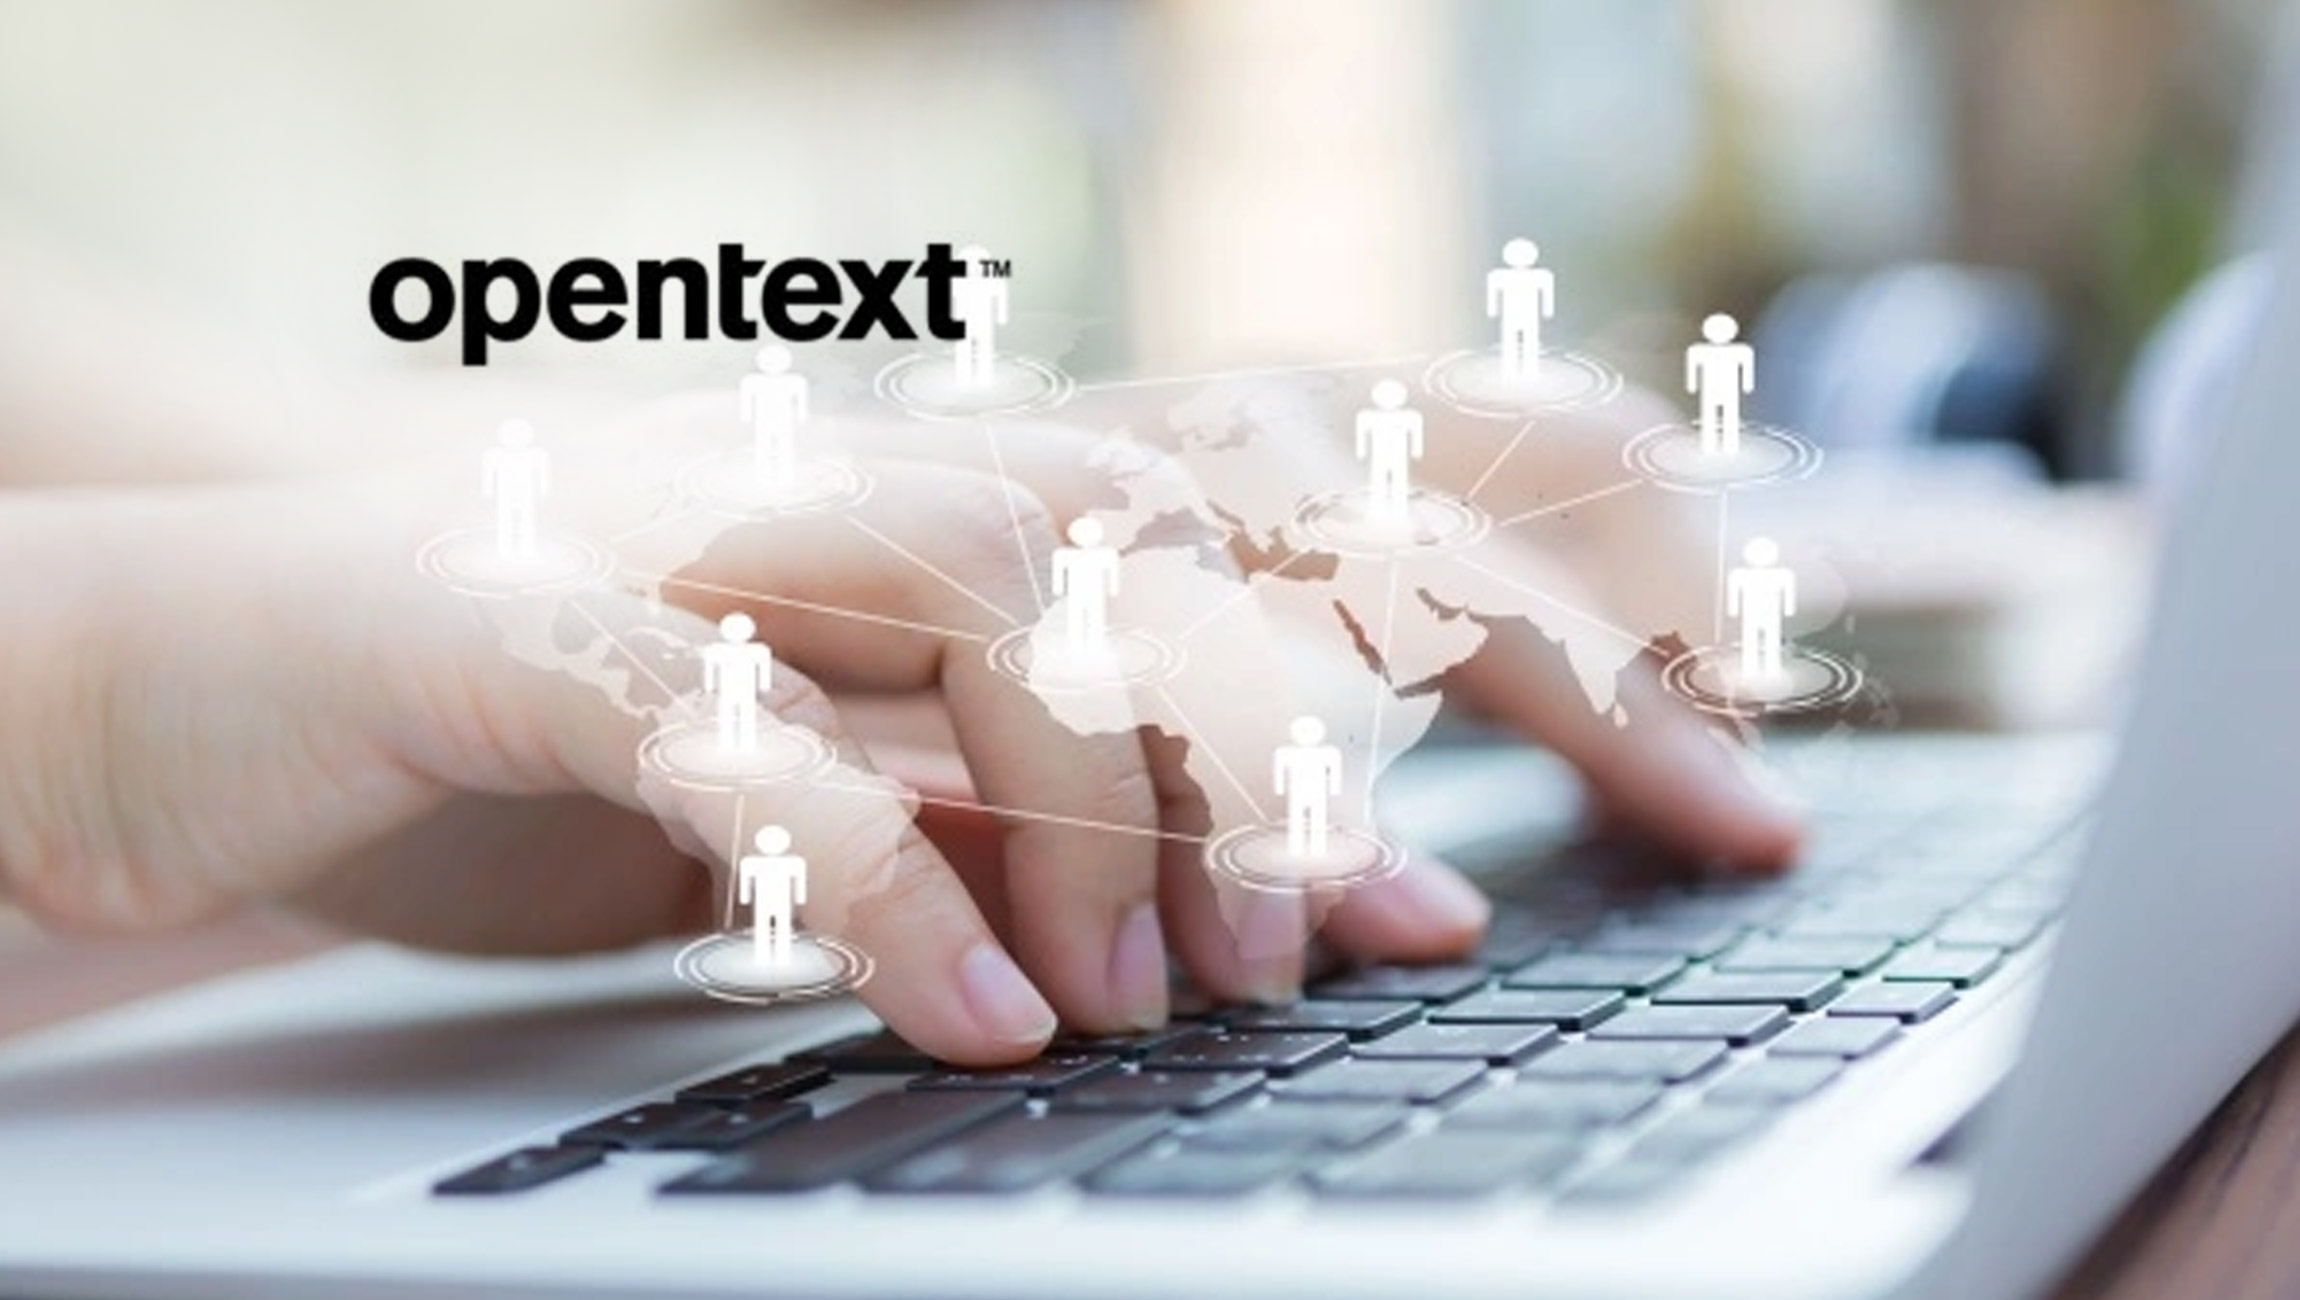 OpenText-Launches-Virtual-Summit-for-Business-Leaders-to-Share-Best-Practices-on-Digitizing-Supply-Chains-to-Minimize-Disruption